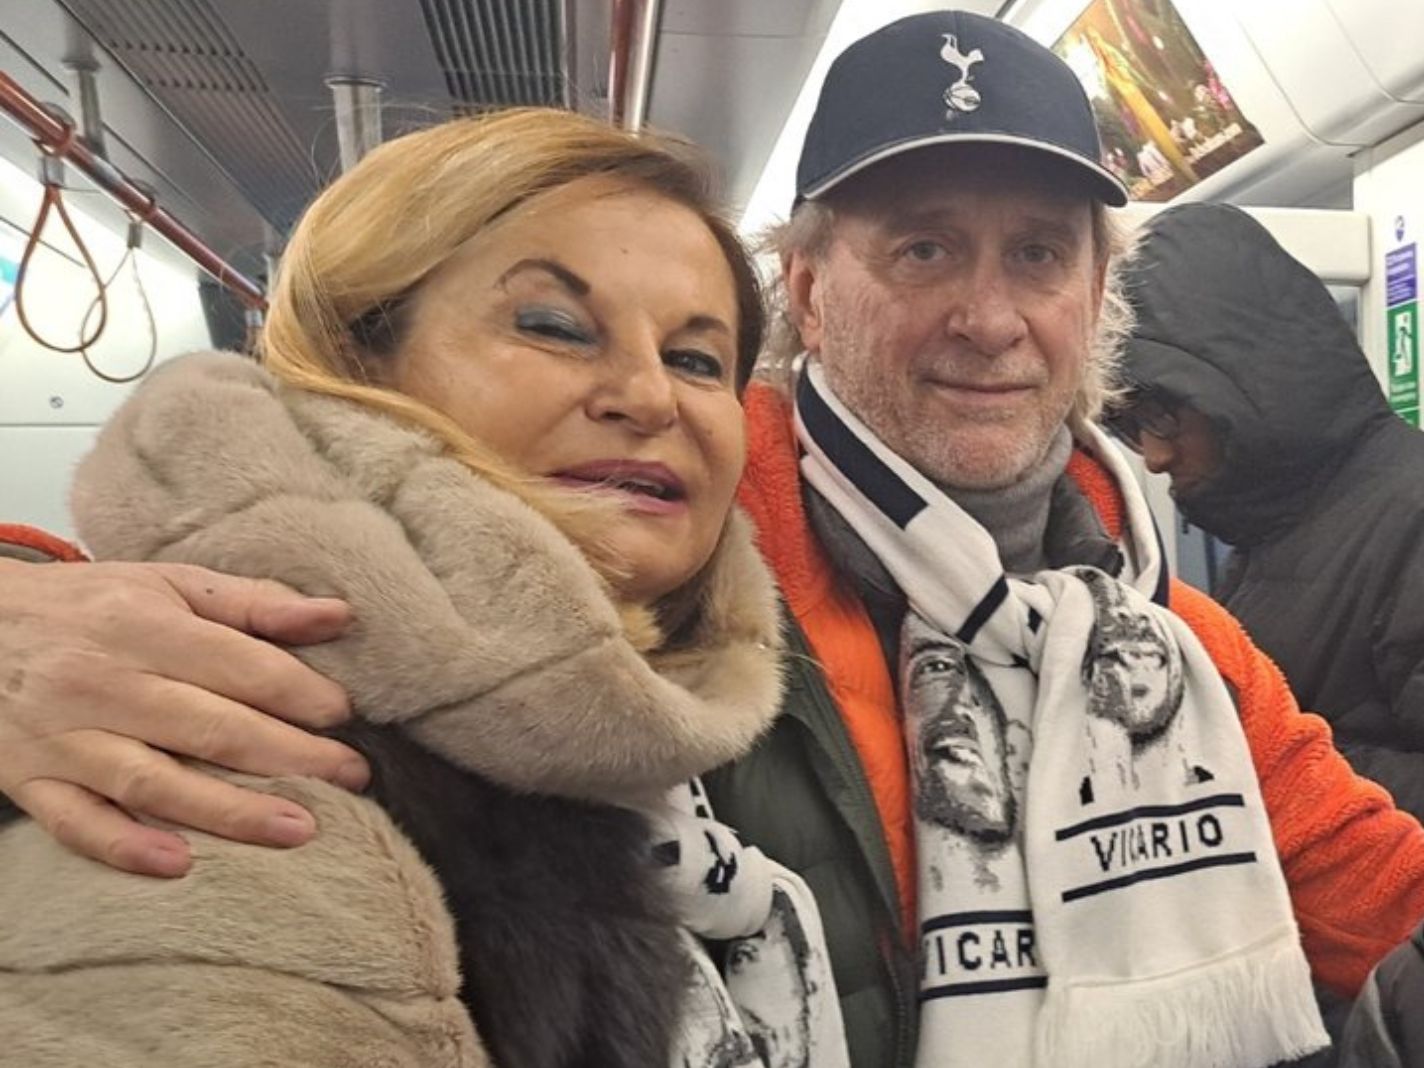 Who Are Guglielmo Vicario’s Parents? Meet Tottenham’s Newest Fans: Michele and Monica